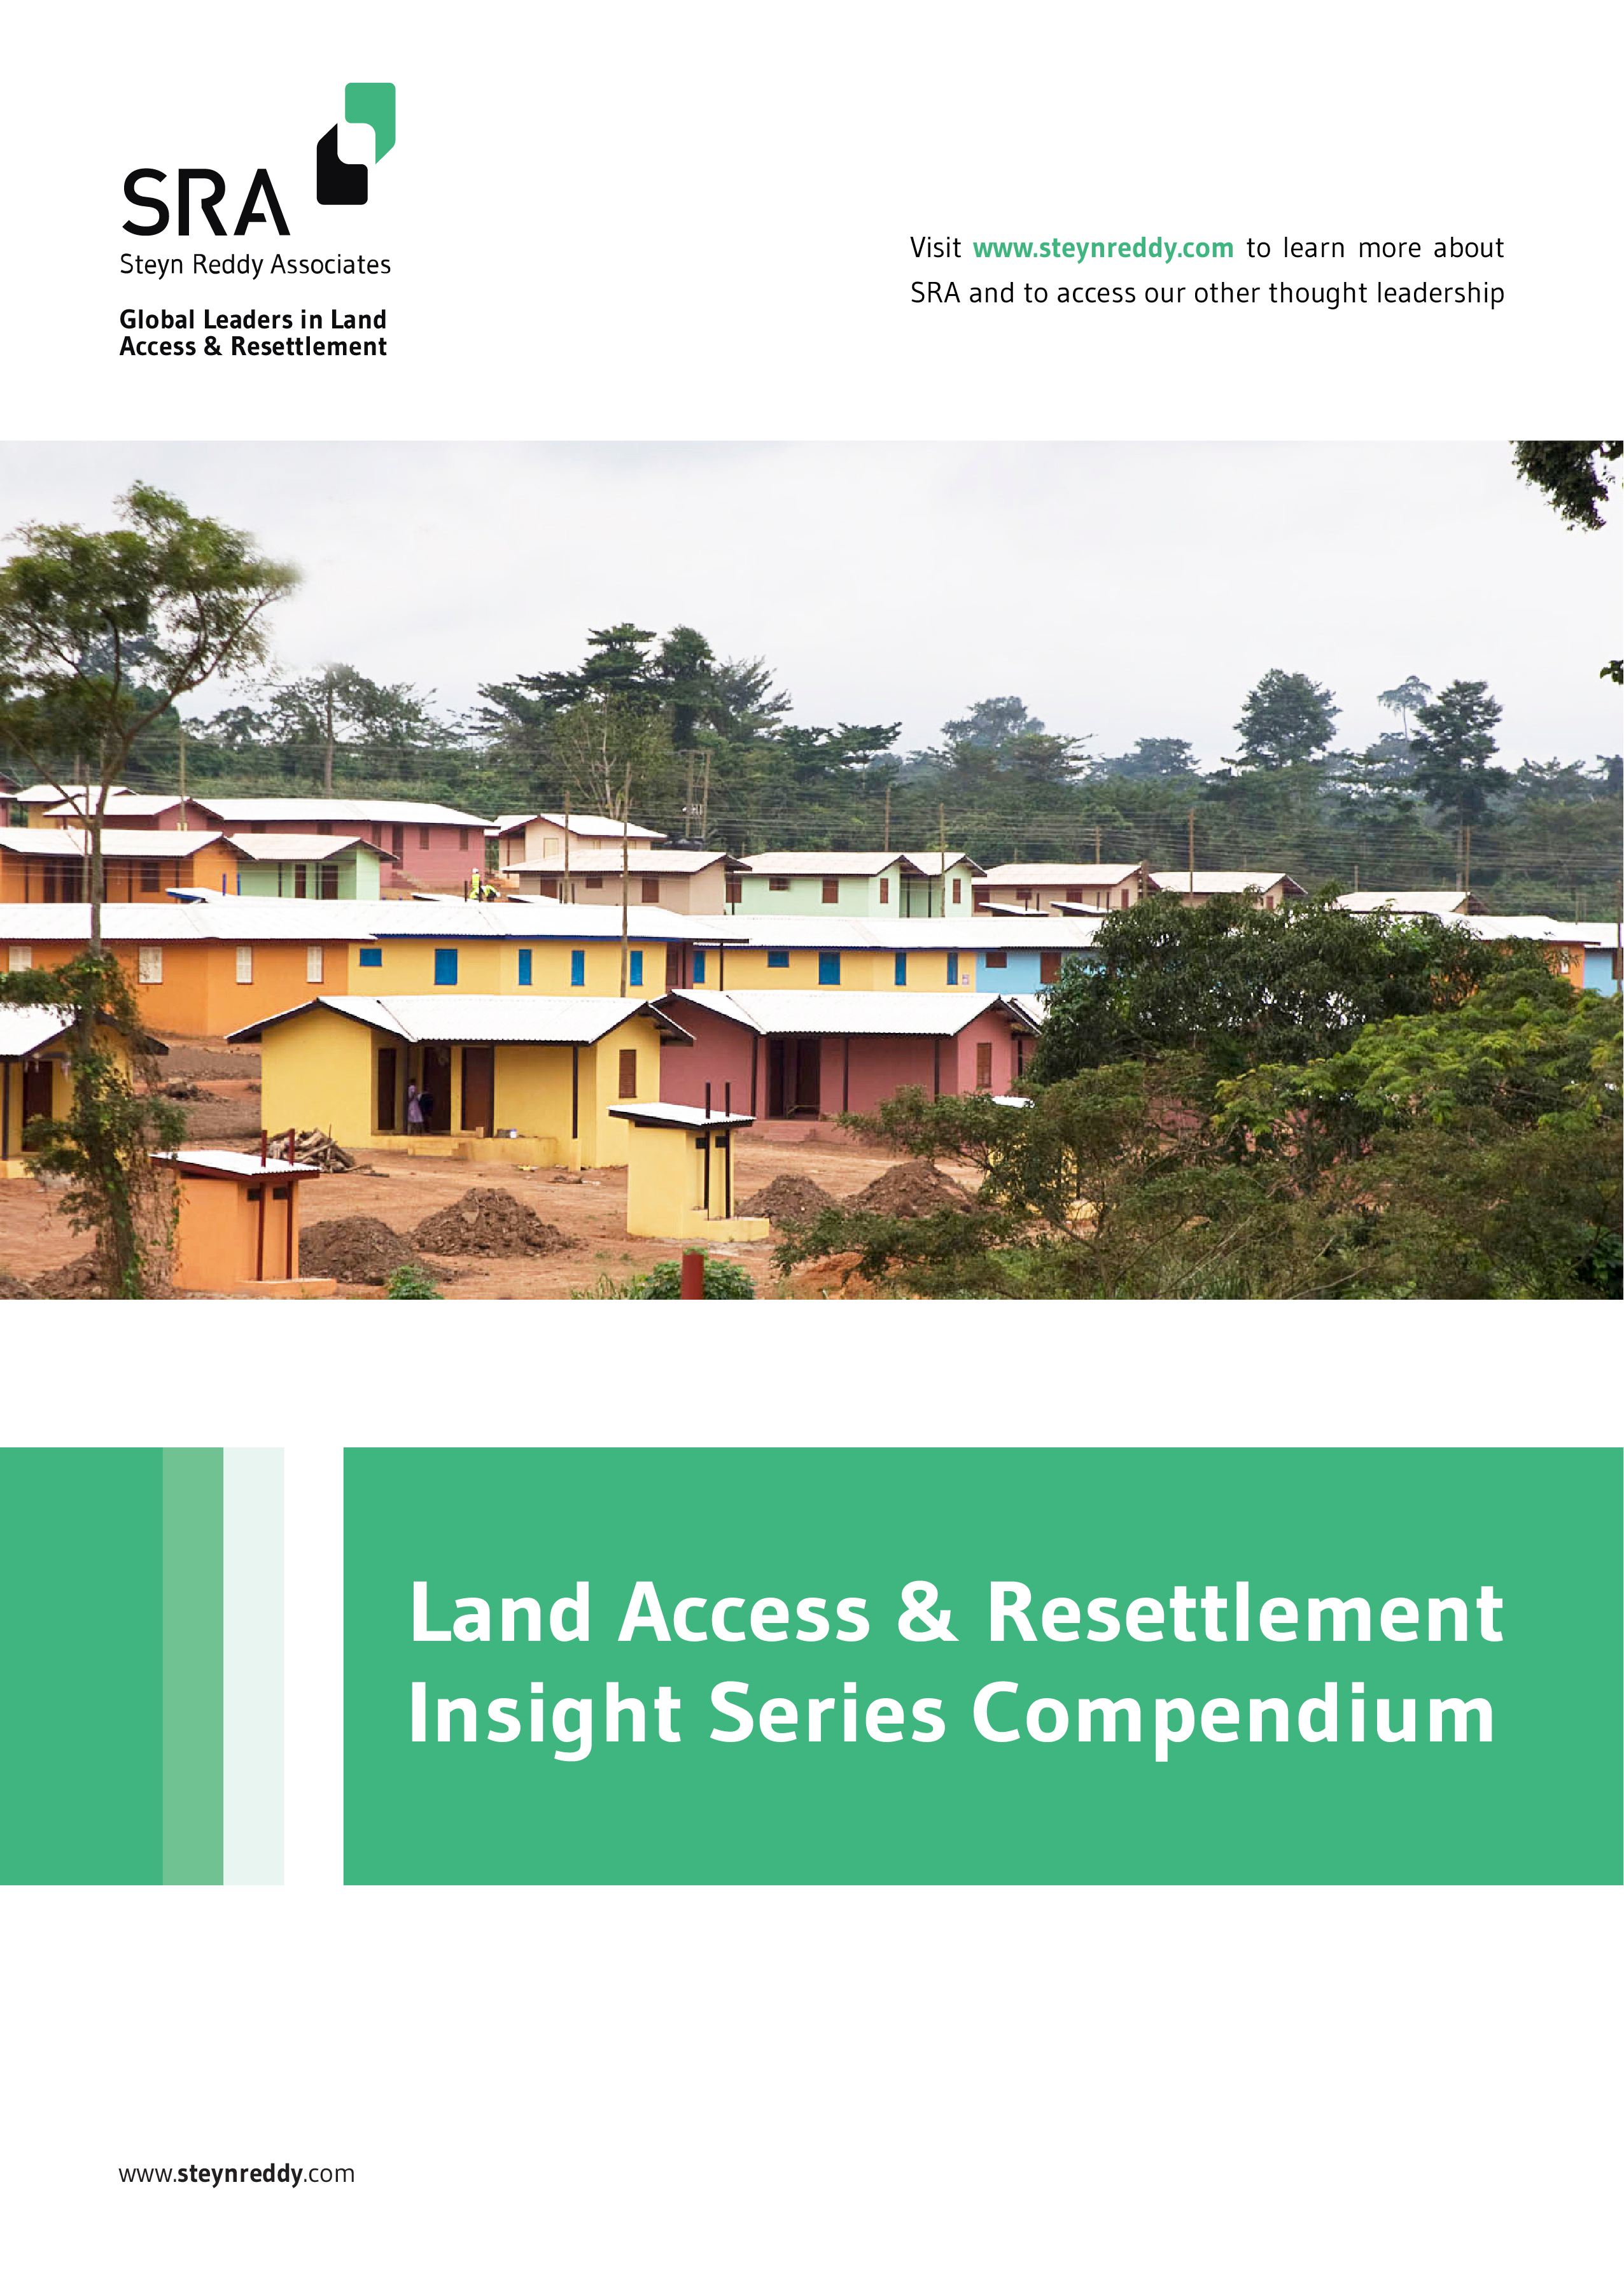 SRA-Land-Access-And-Resettlement-Compendium-Cover-01